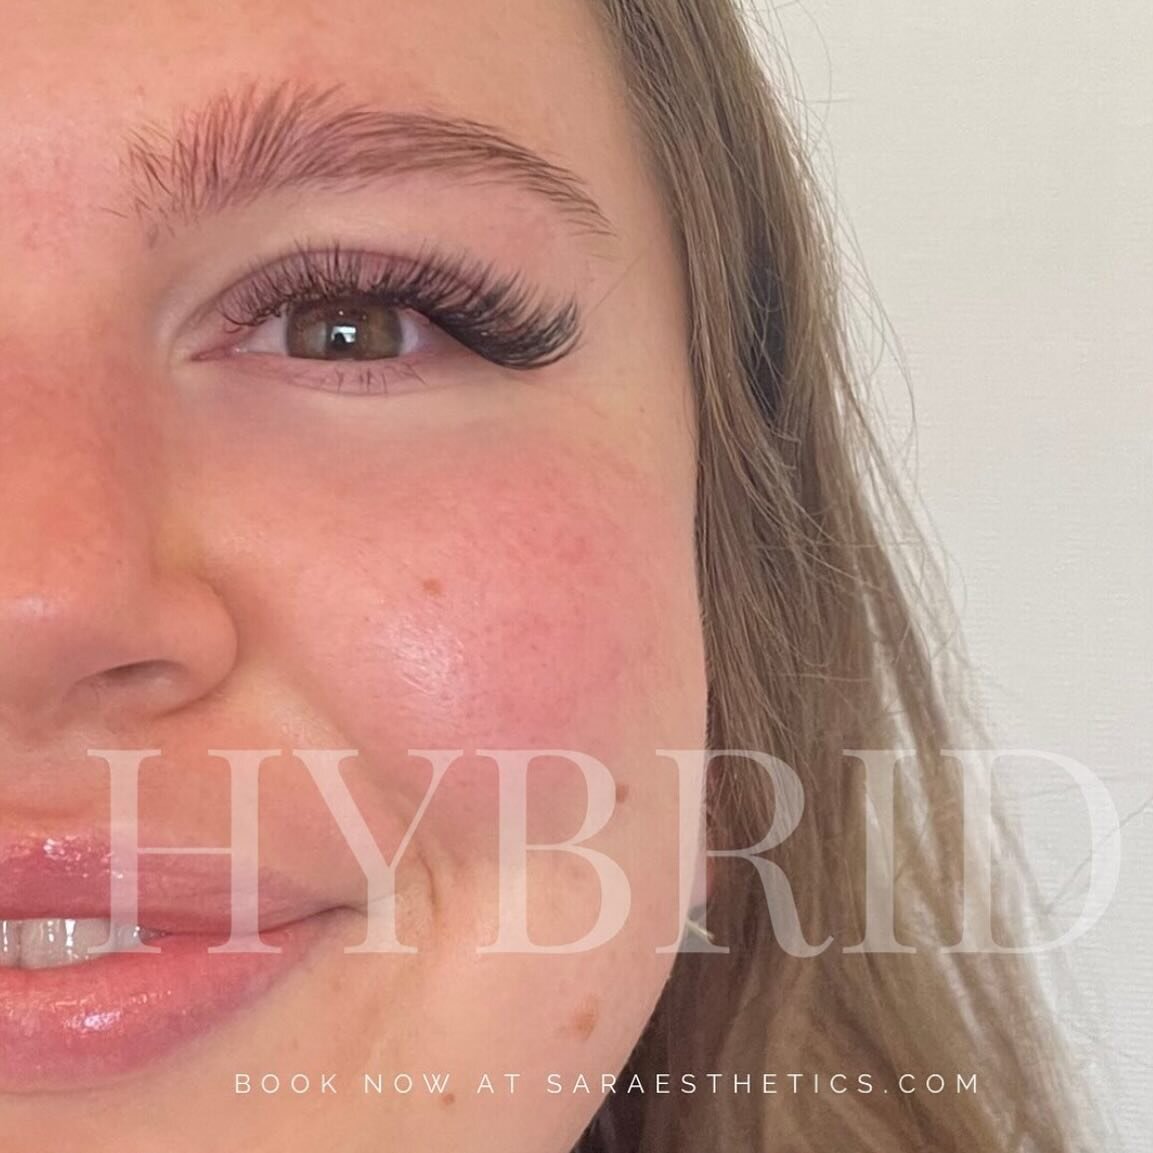 Another hybrid set by Courtney💕We are currently accepting new clients! Book your appointment for a full set now😊 
⠀⠀⠀⠀⠀⠀

⠀⠀⠀⠀⠀⠀ ⠀⠀⠀⠀⠀⠀ ⠀⠀⠀⠀ #raleighlash #raleighlashartist #raleighlashes #raleighlash #raleighlashartist #nclashes #raleighbrows #ral